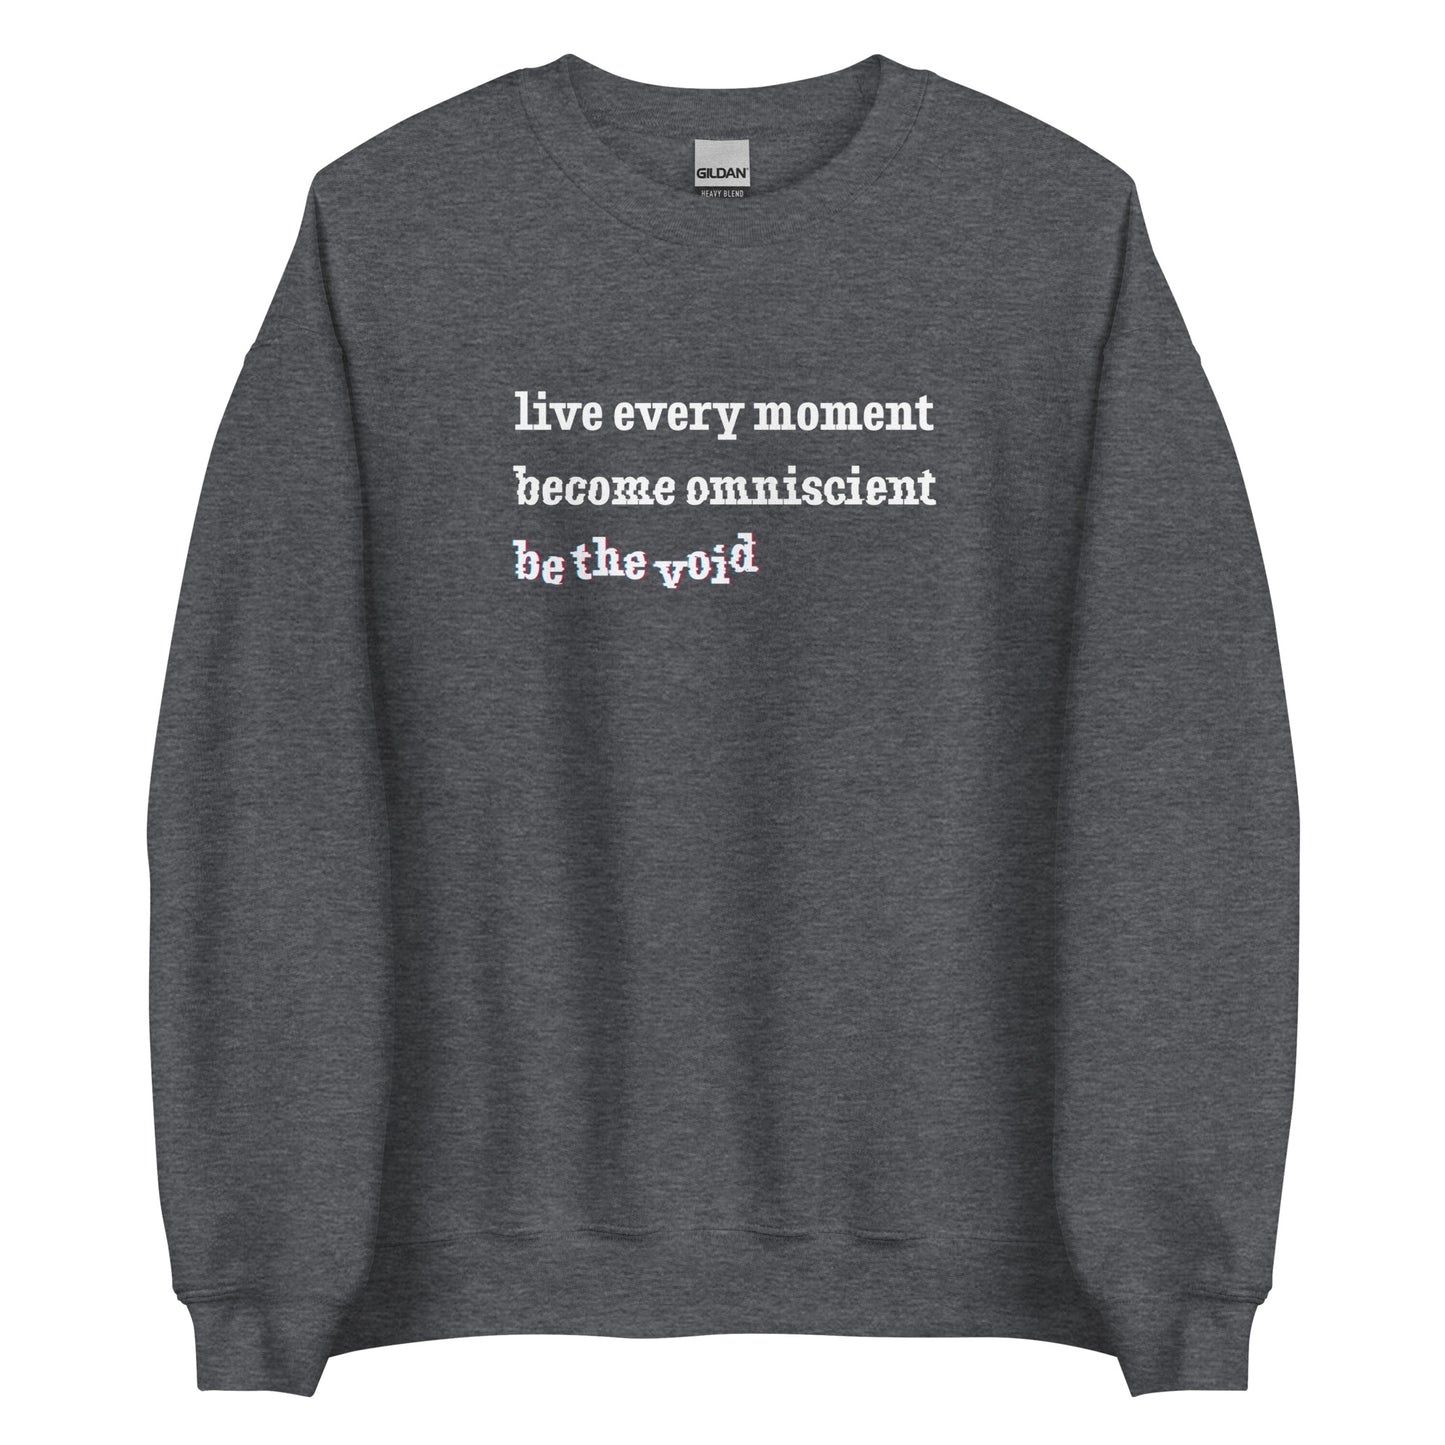 A heather grey crewneck sweatshirt featuring text reading "live every moment, become omniscient, be the void" in an increasingly distorted font.